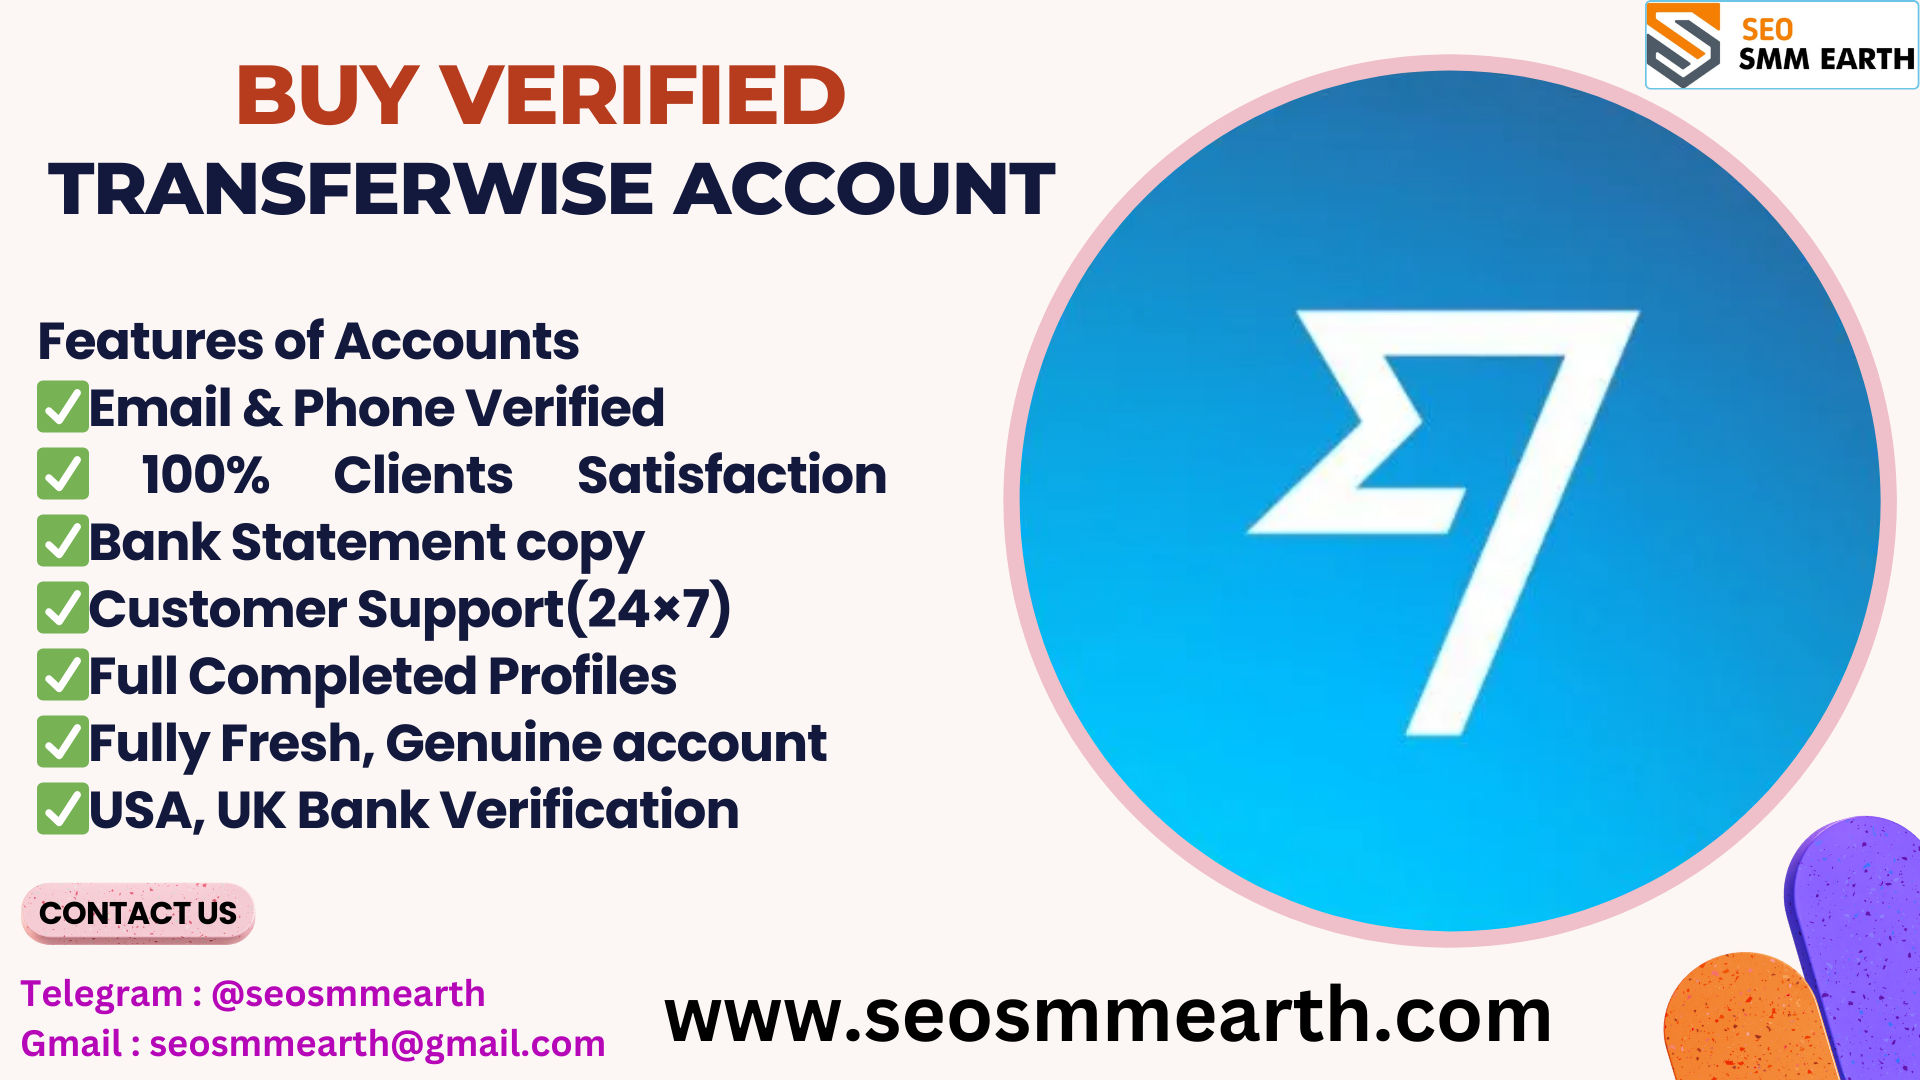 Buy Verified TransferWise Accounts - 100% Positive TransferWise Account